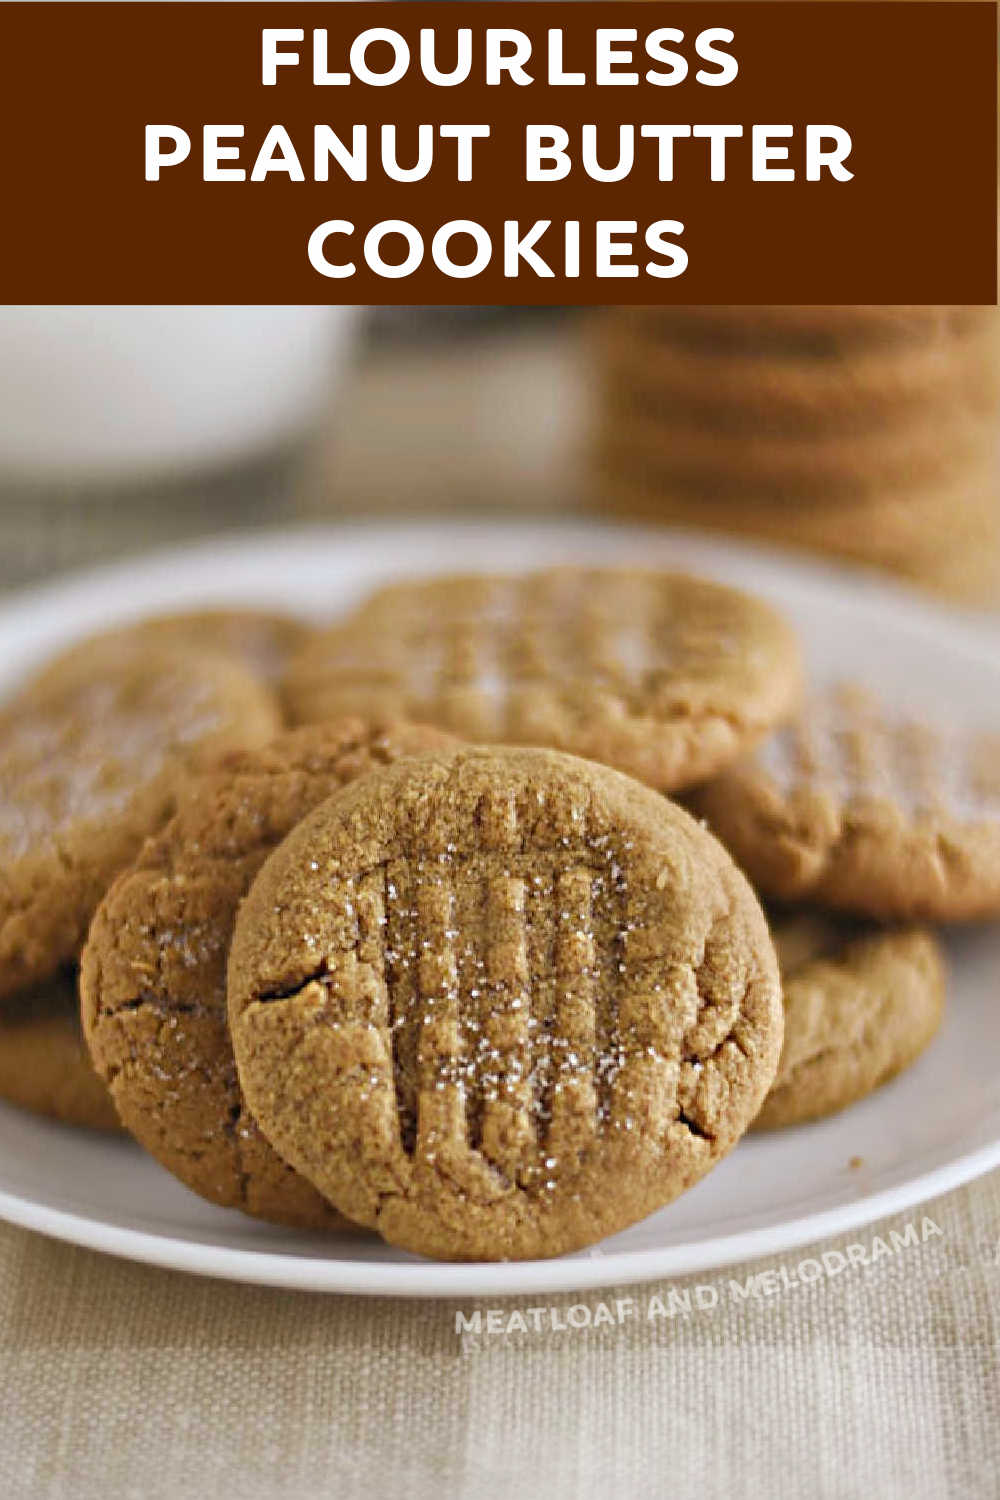 This 4 ingredient peanut butter cookies recipe without brown sugar and without flour makes the best peanut butter cookies! These easy flourless peanut butter cookies are soft, sweet and melt in your mouth! via @meamel